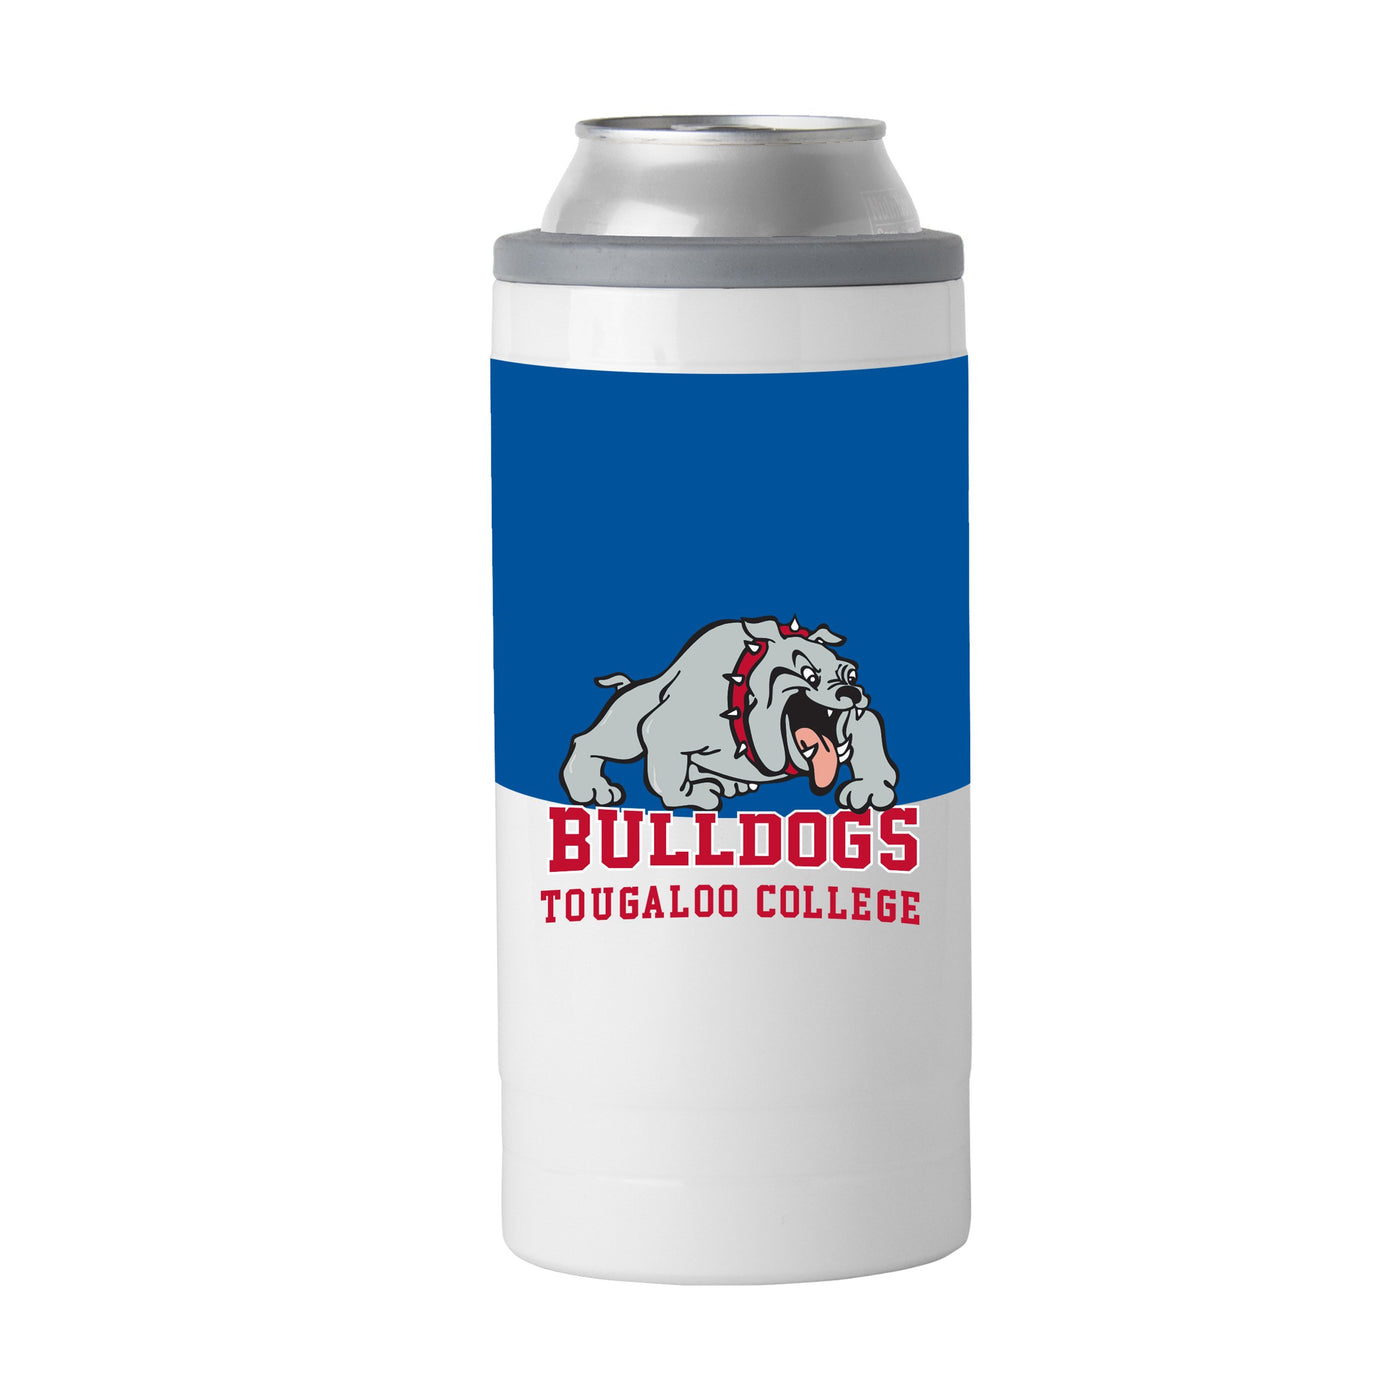 Tougaloo College 12oz Colorblock Slim Can Coolie